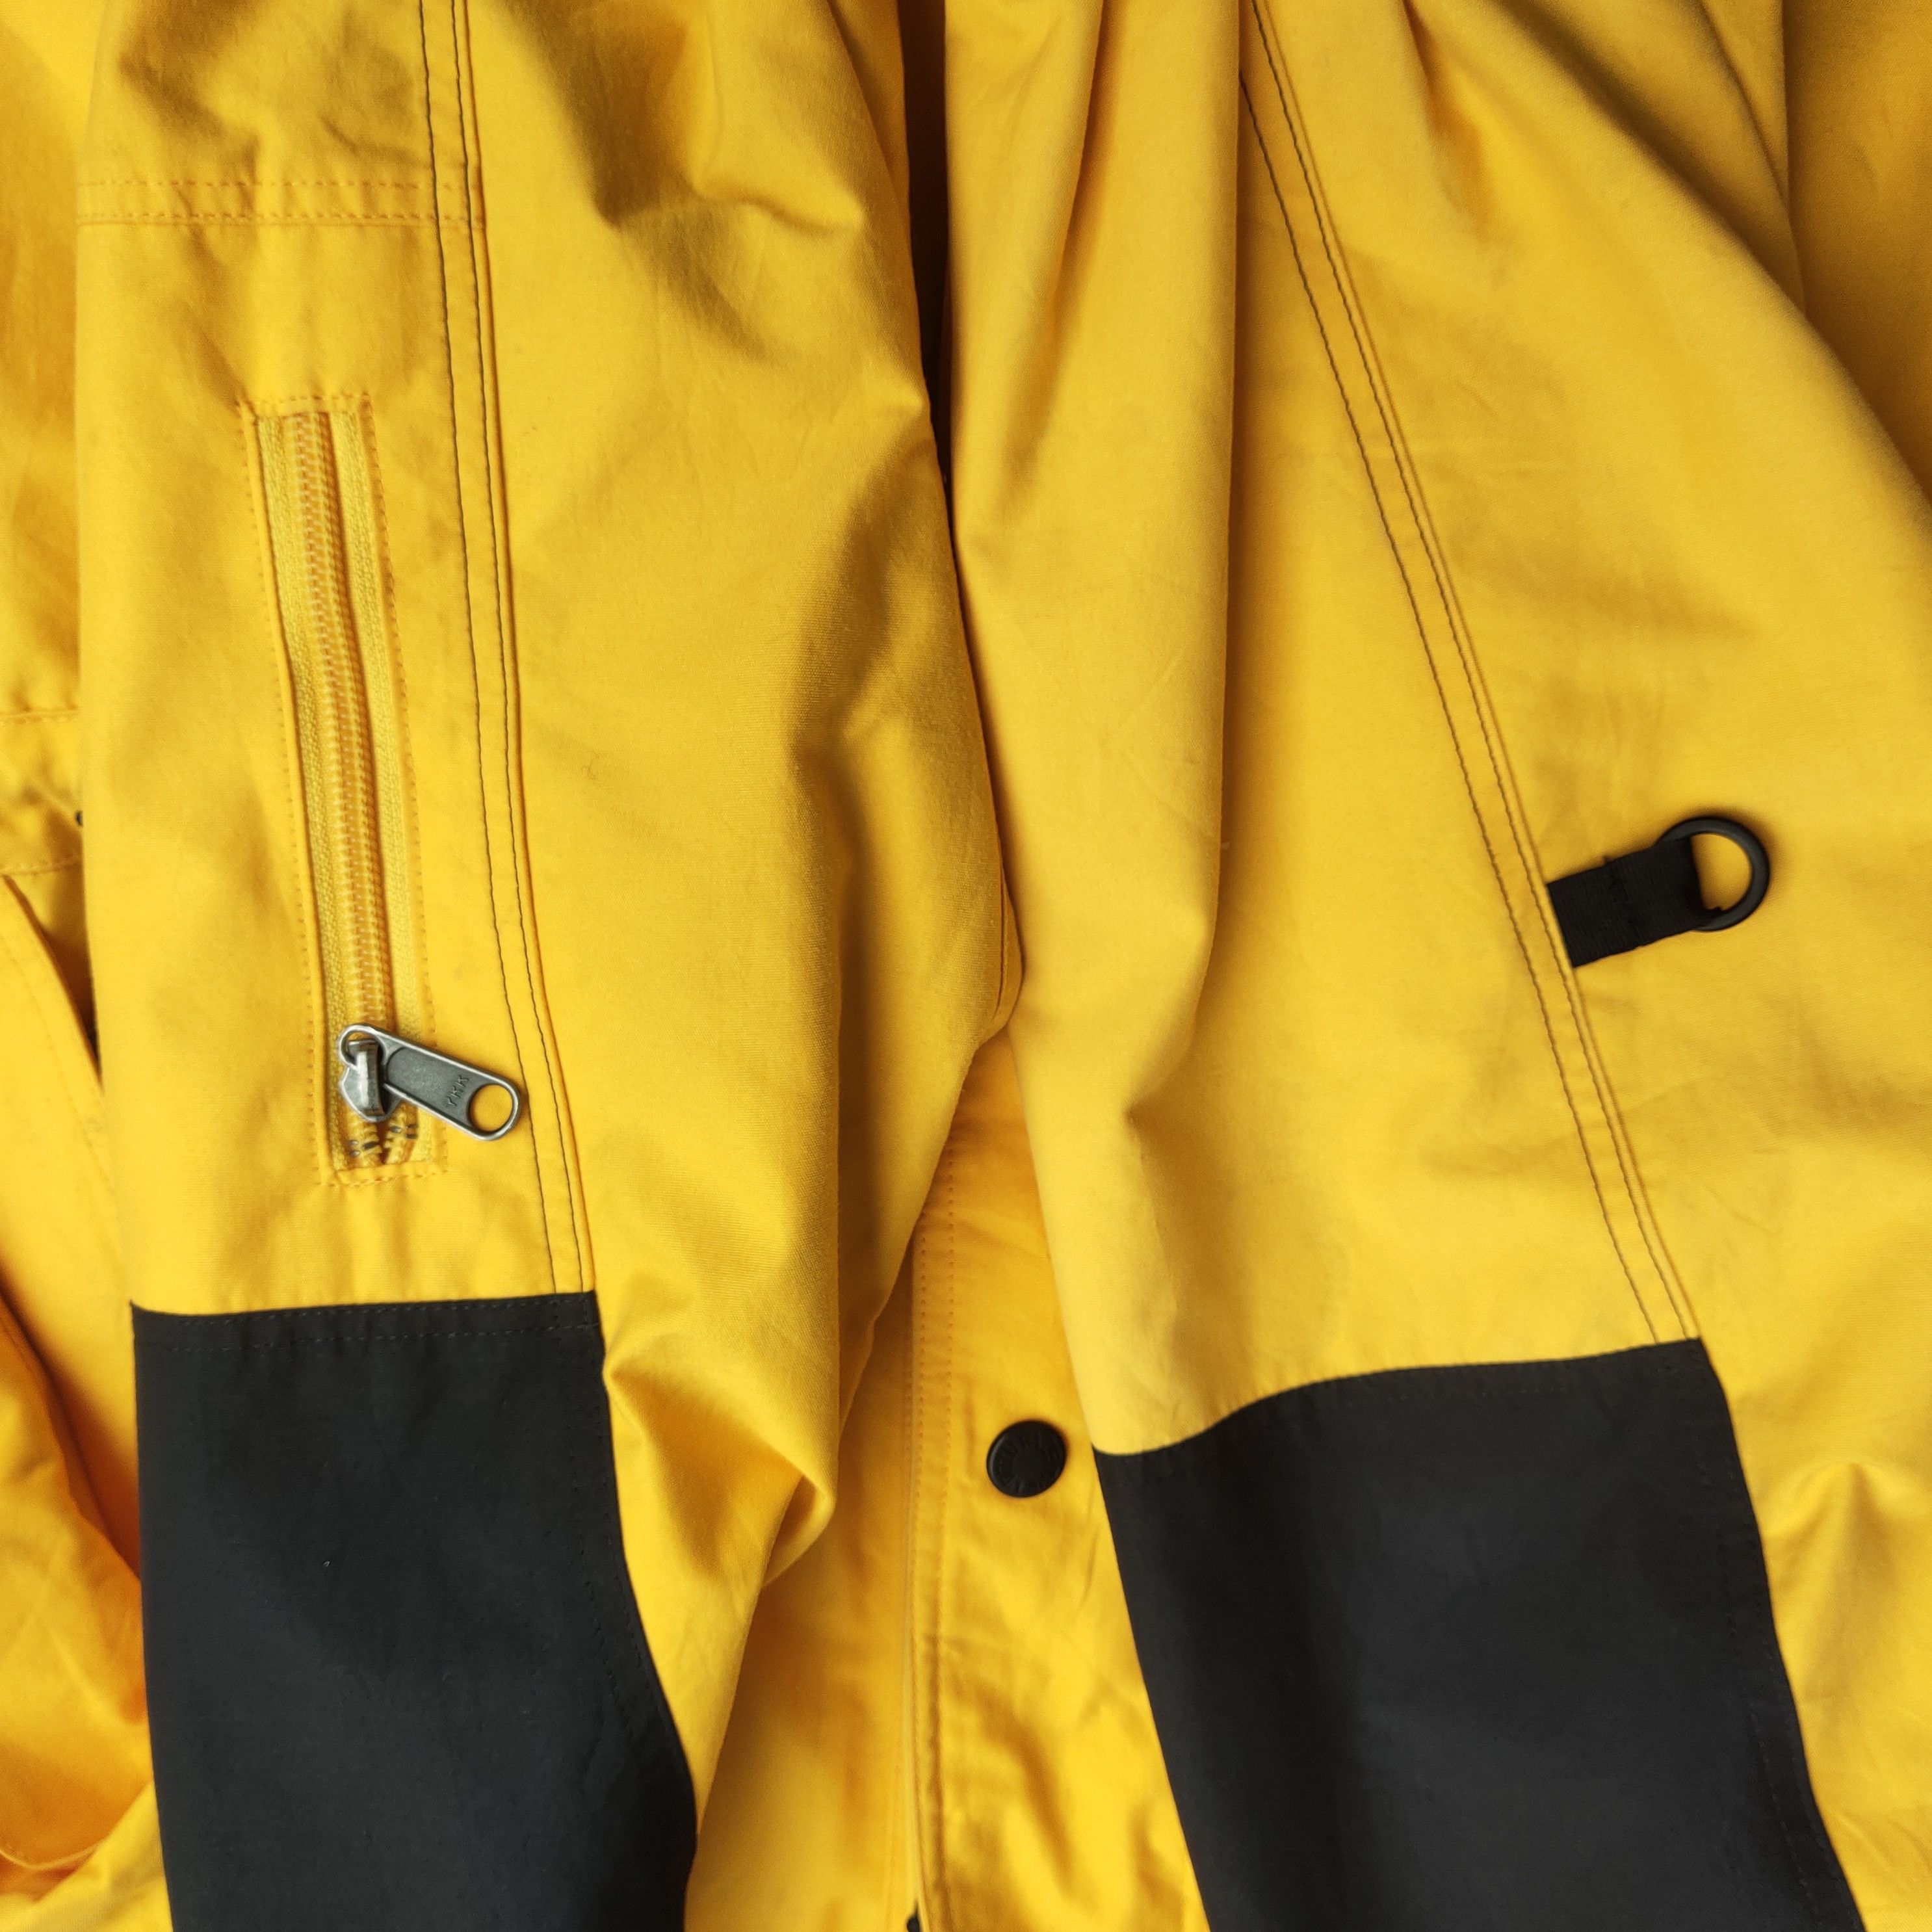 The North Face Vintage North Face Gore-Tex Yellow Jacket Size US M / EU 48-50 / 2 - 4 Thumbnail